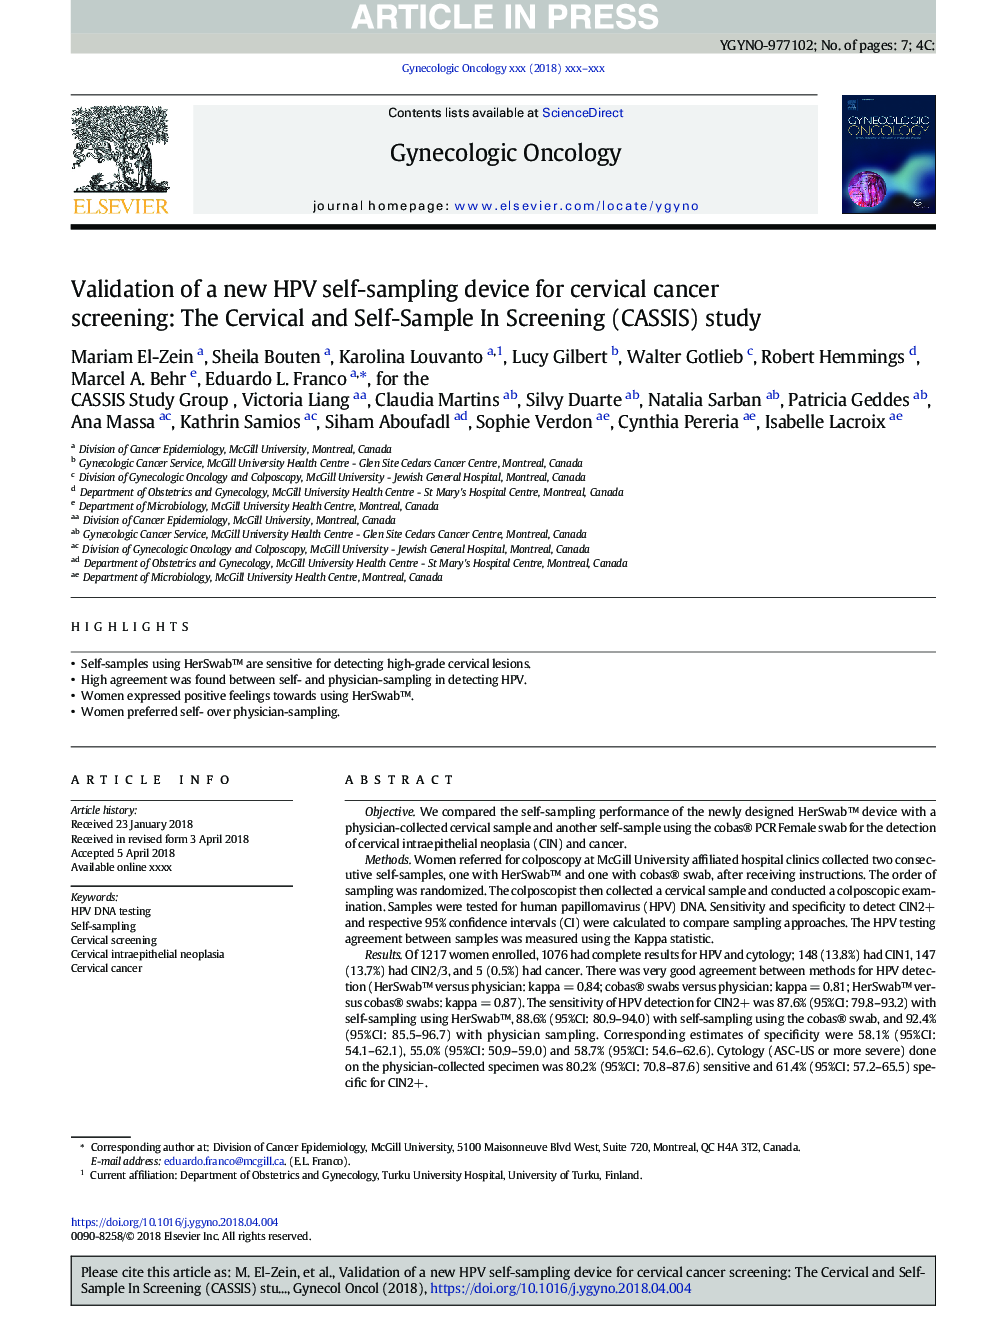 Validation of a new HPV self-sampling device for cervical cancer screening: The Cervical and Self-Sample In Screening (CASSIS) study